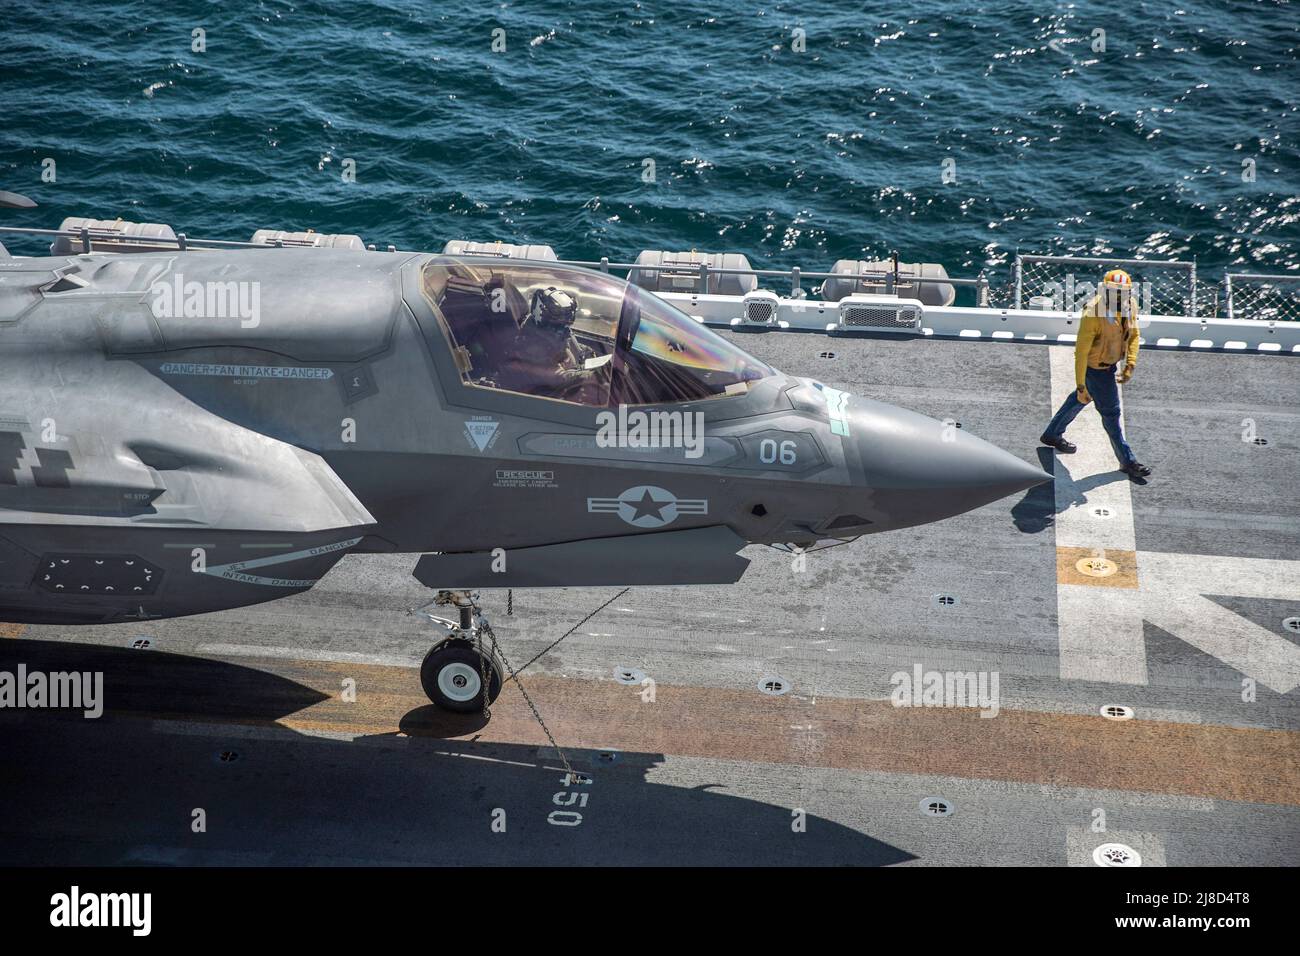 A U.S. Marine Corps F-35B Lightning II fighter aircraft, attached to the Wake Island Avengers of Marine Attack Squadron 211, prepares to take off from the flight deck of the Wasp-class amphibious assault ship USS Essex, March 24, 2021 operating on the Pacific Ocean. Stock Photo